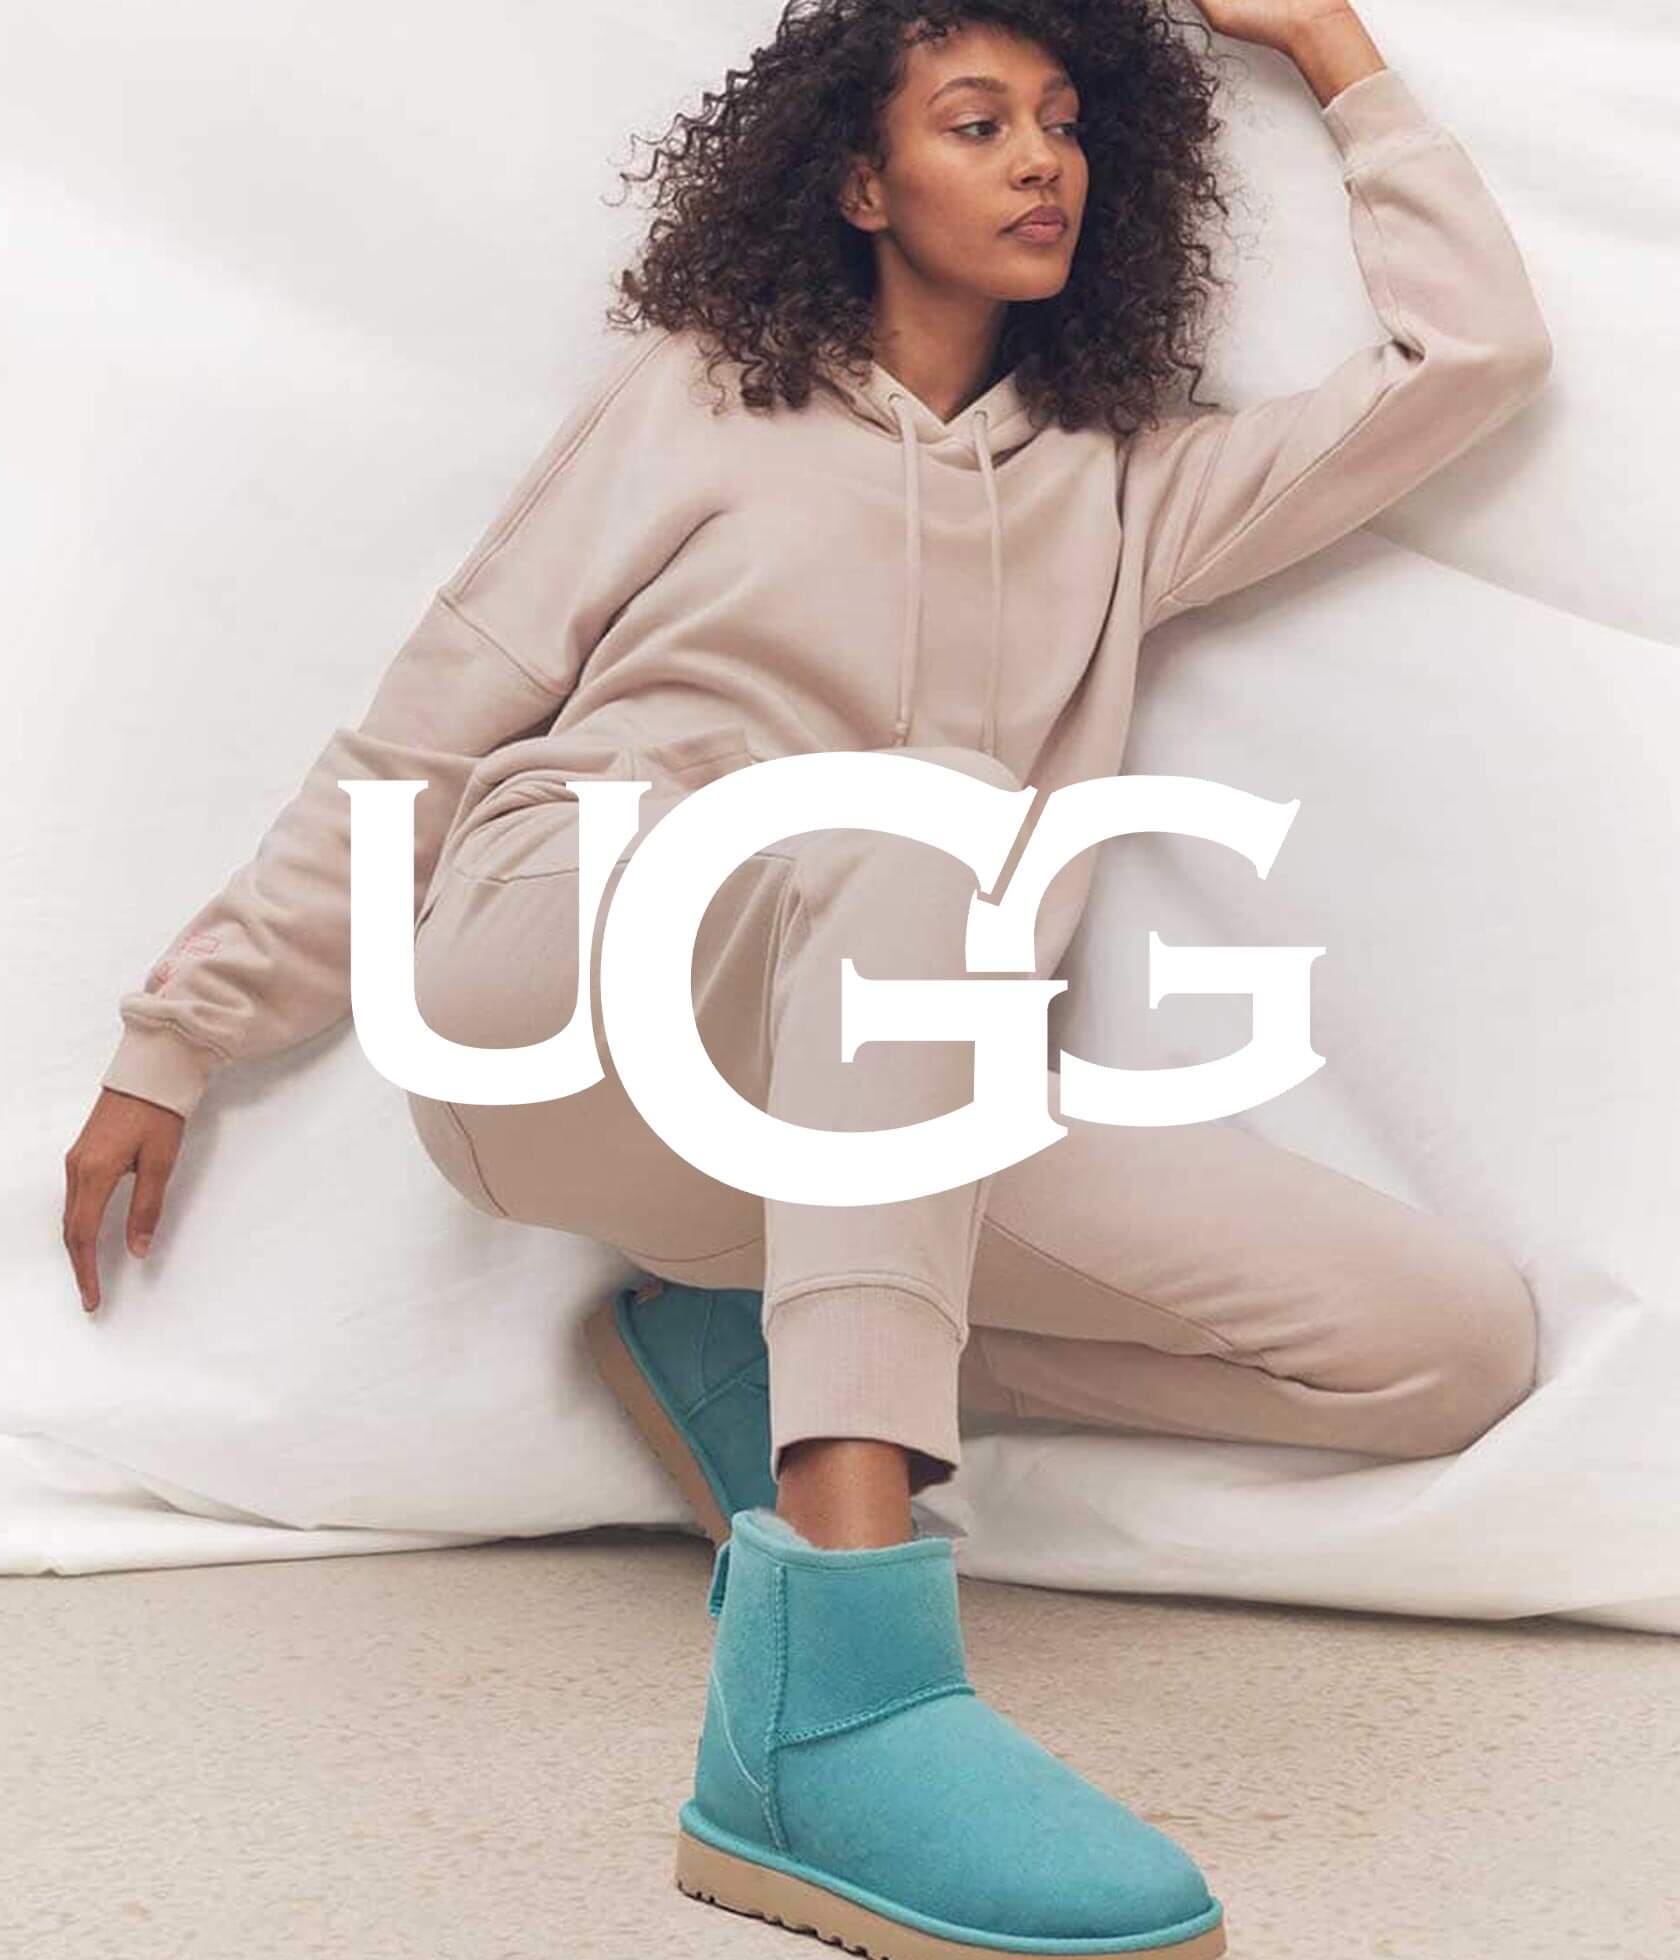 uggs buy now pay later